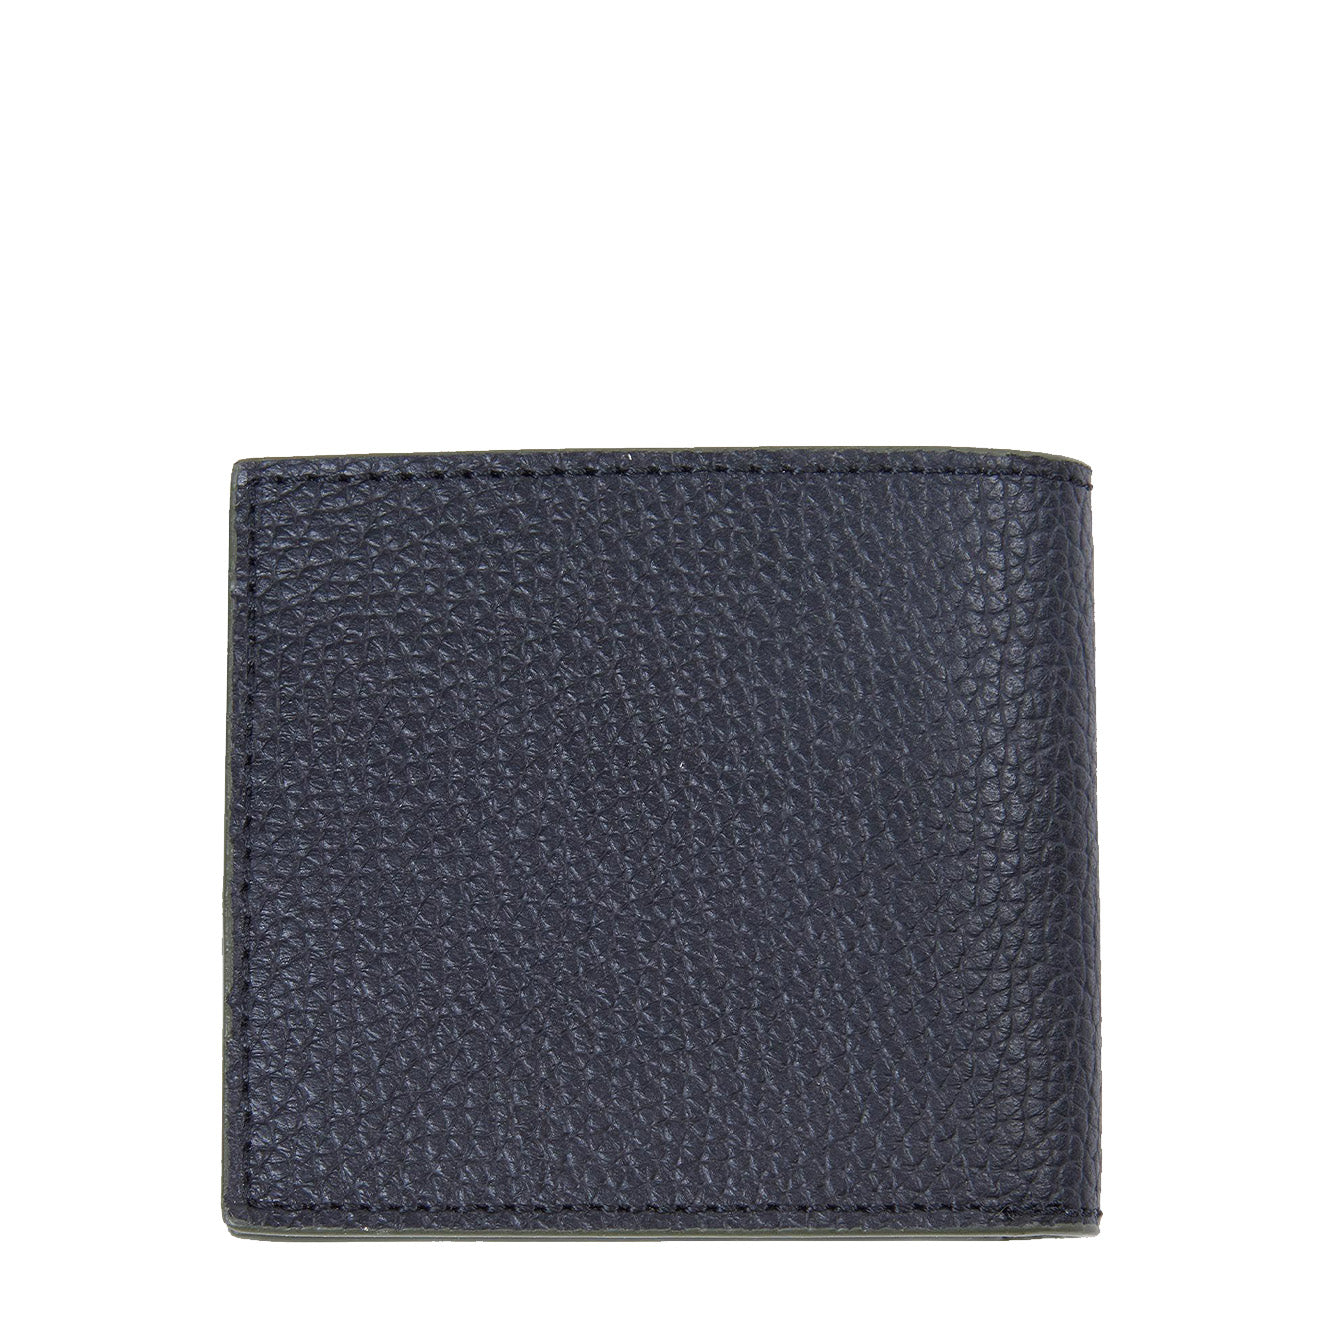 Barbour Grain Leather Billfold Wallet Black | The Sporting Lodge